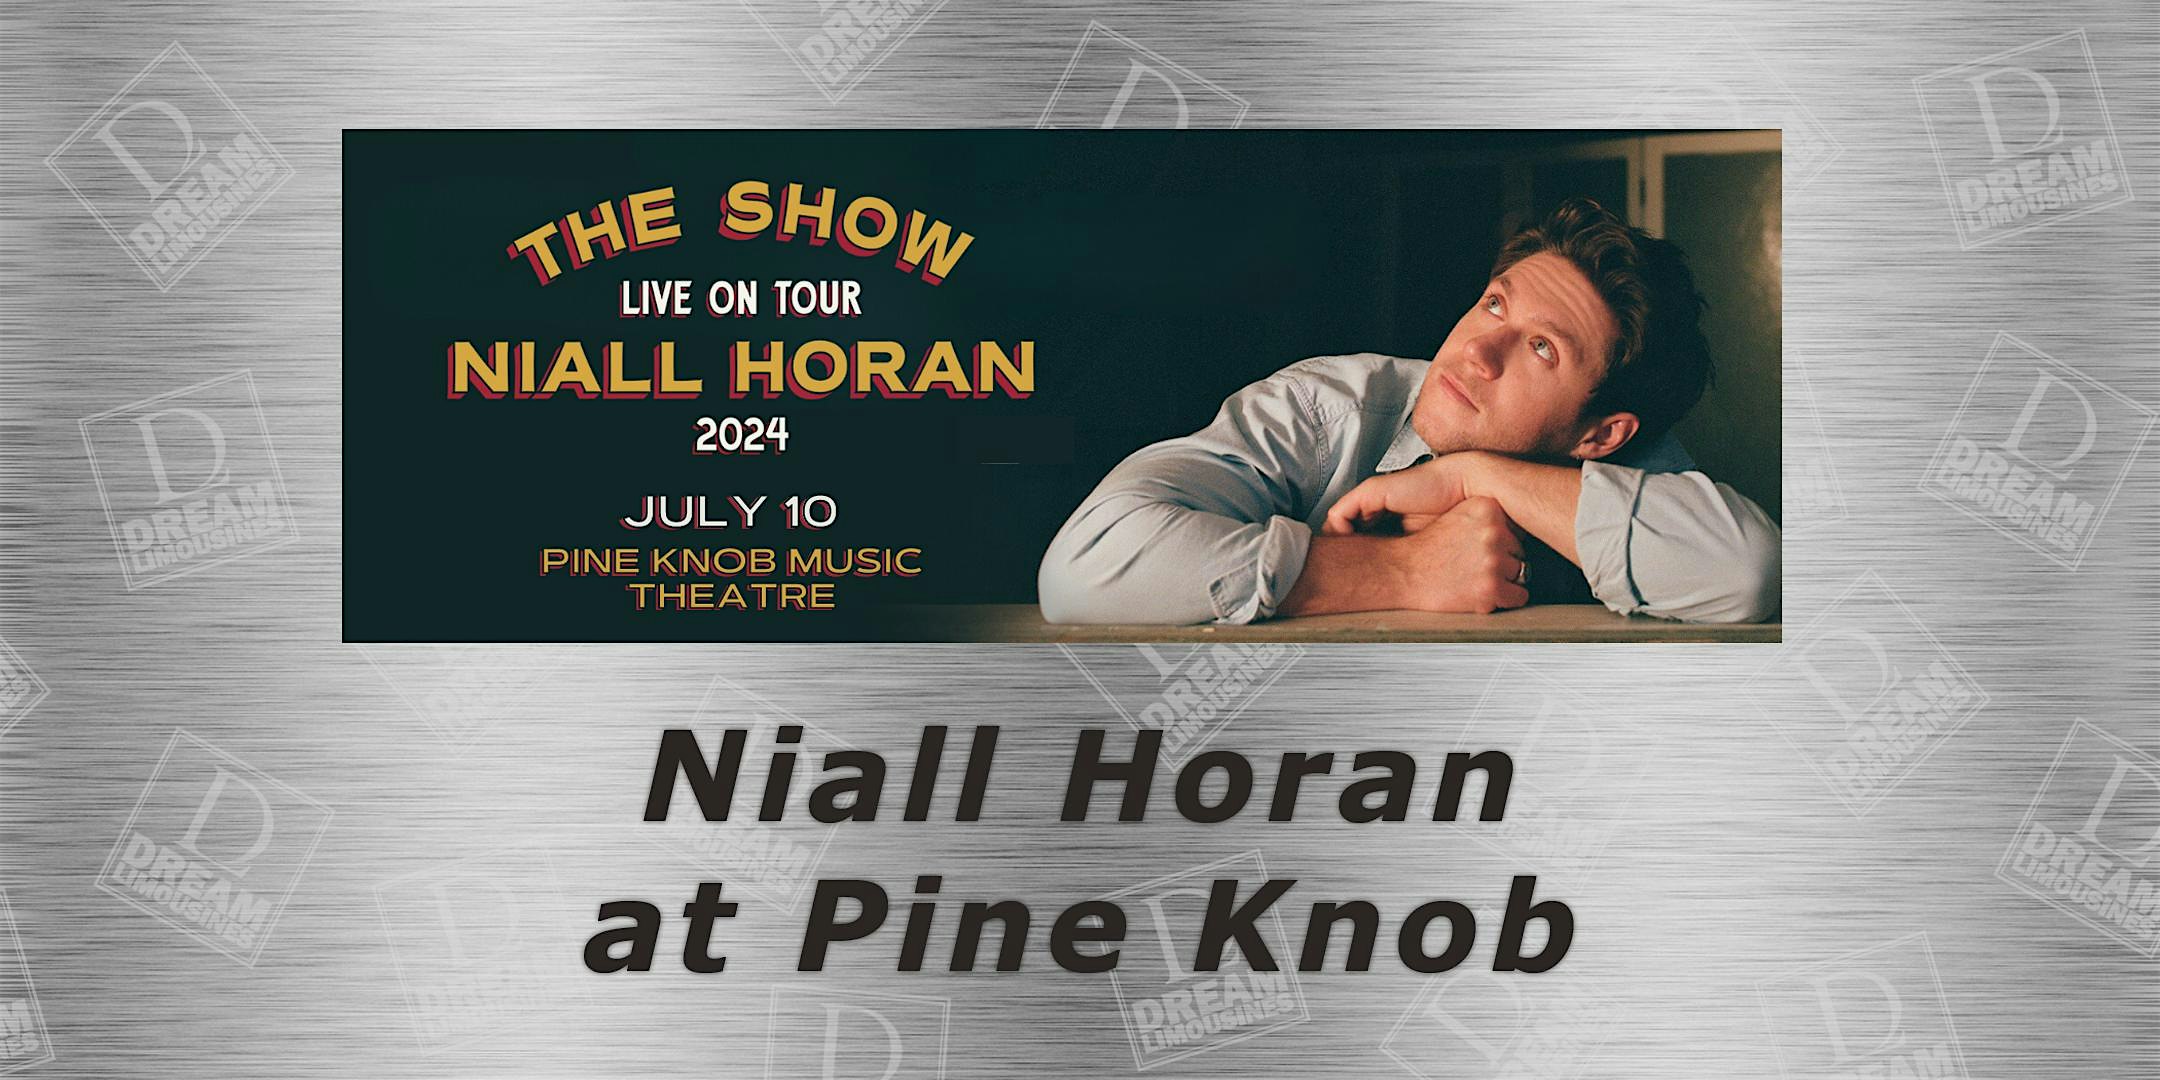 Shuttle Bus to See Niall Horan at Pine Knob Music Theatre